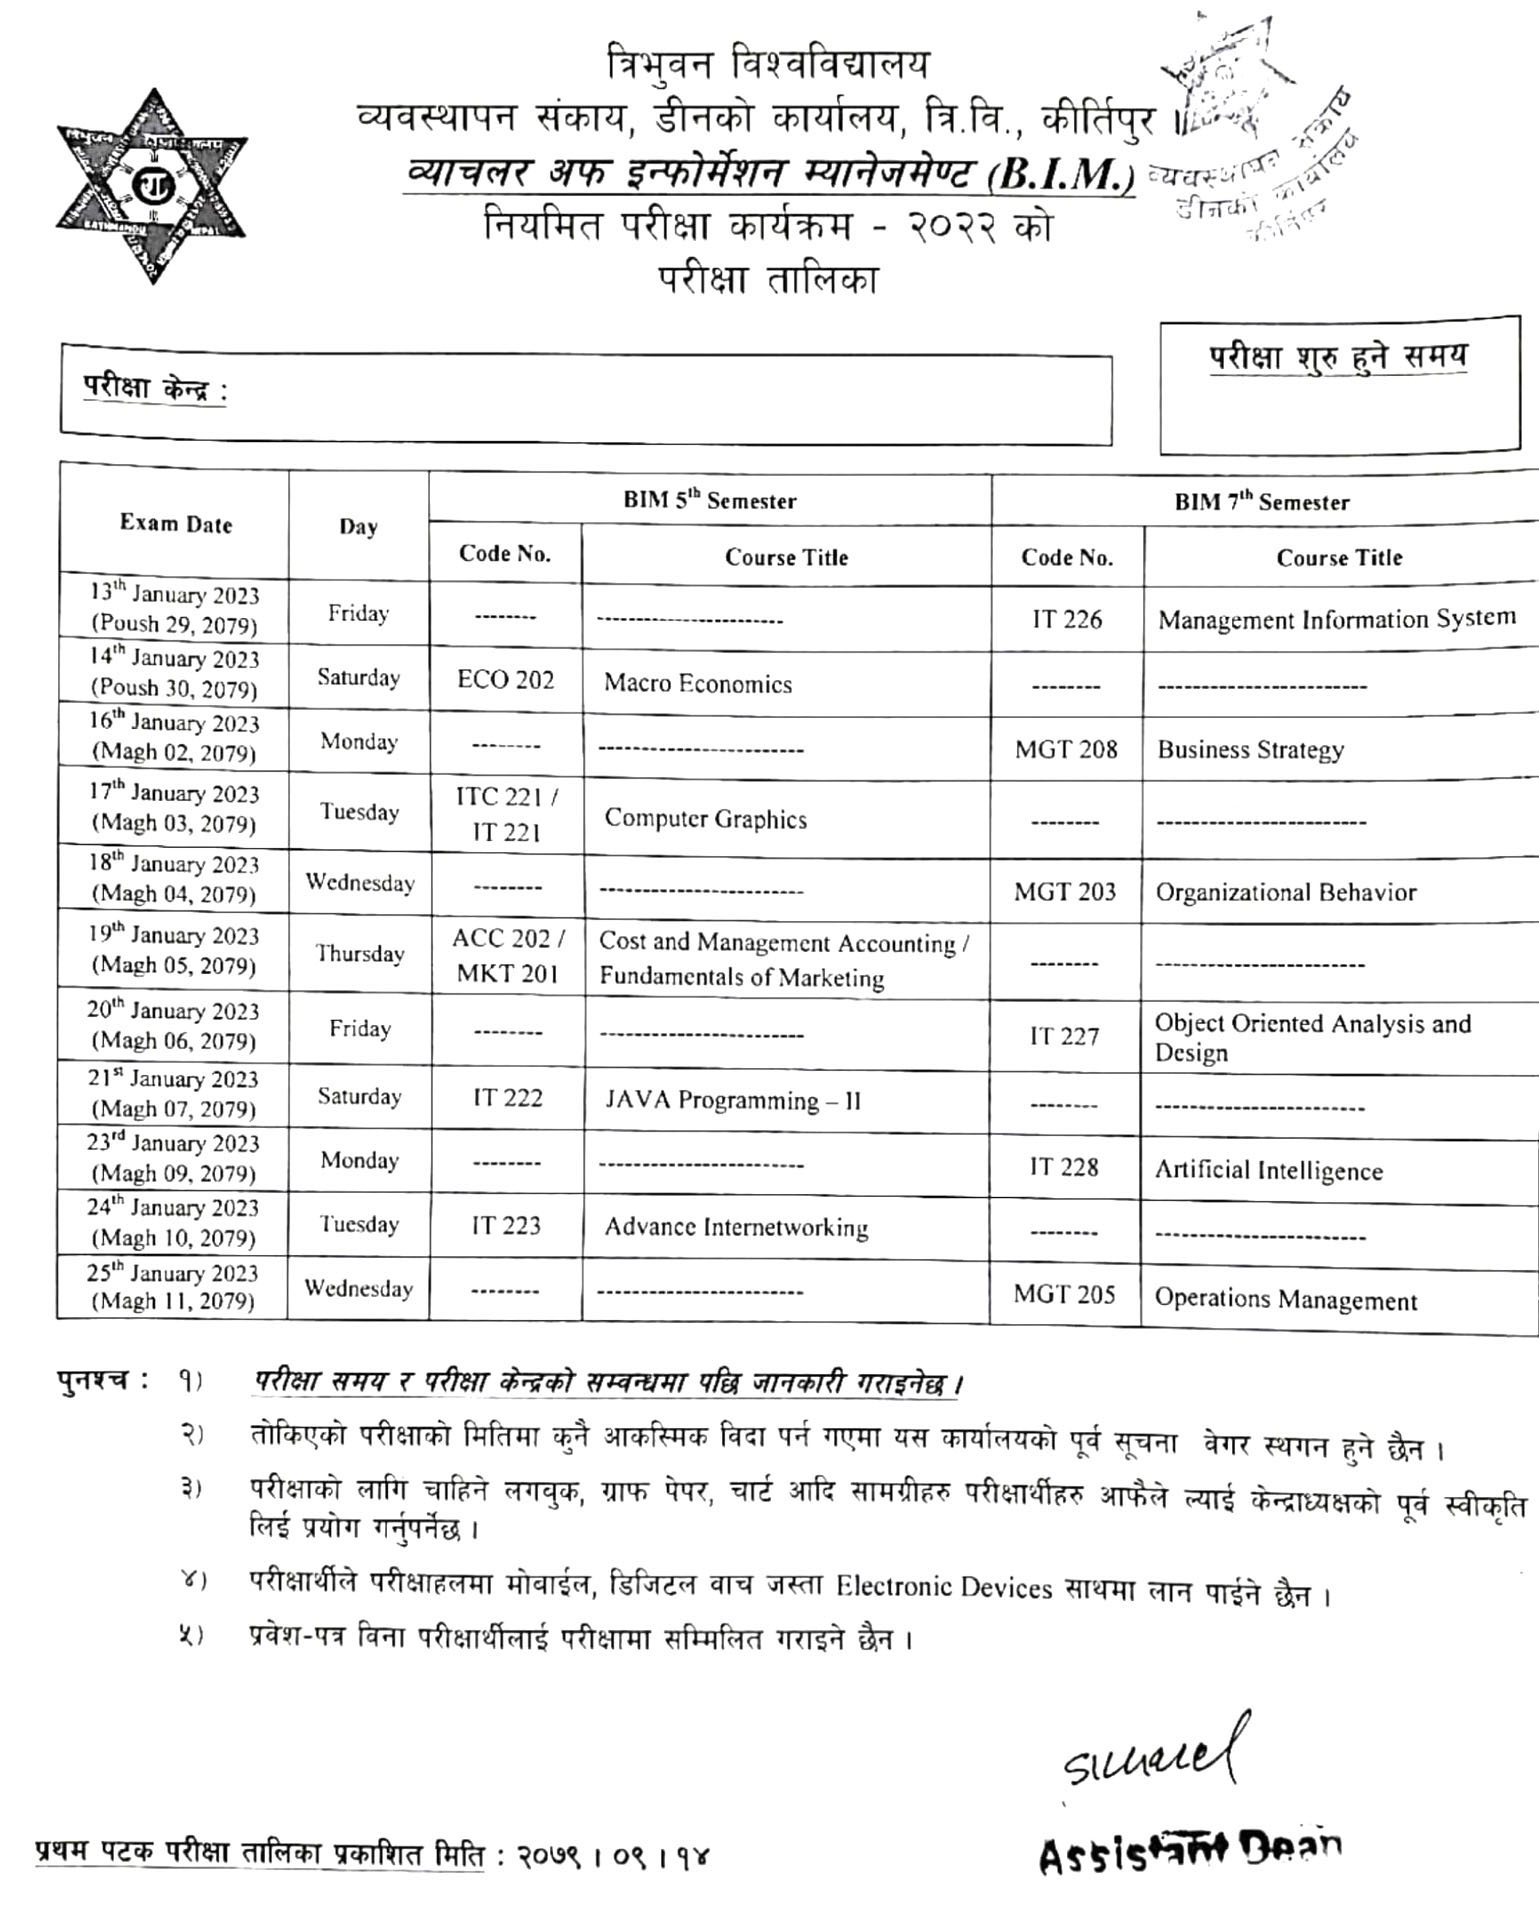 Tribhuvan University Faculty of Management, Dean's Office, TU, Kirtipur has published the examination schedule for Bachelor of Information Management (B.I.M.) 5th semester regular examination program 2023.